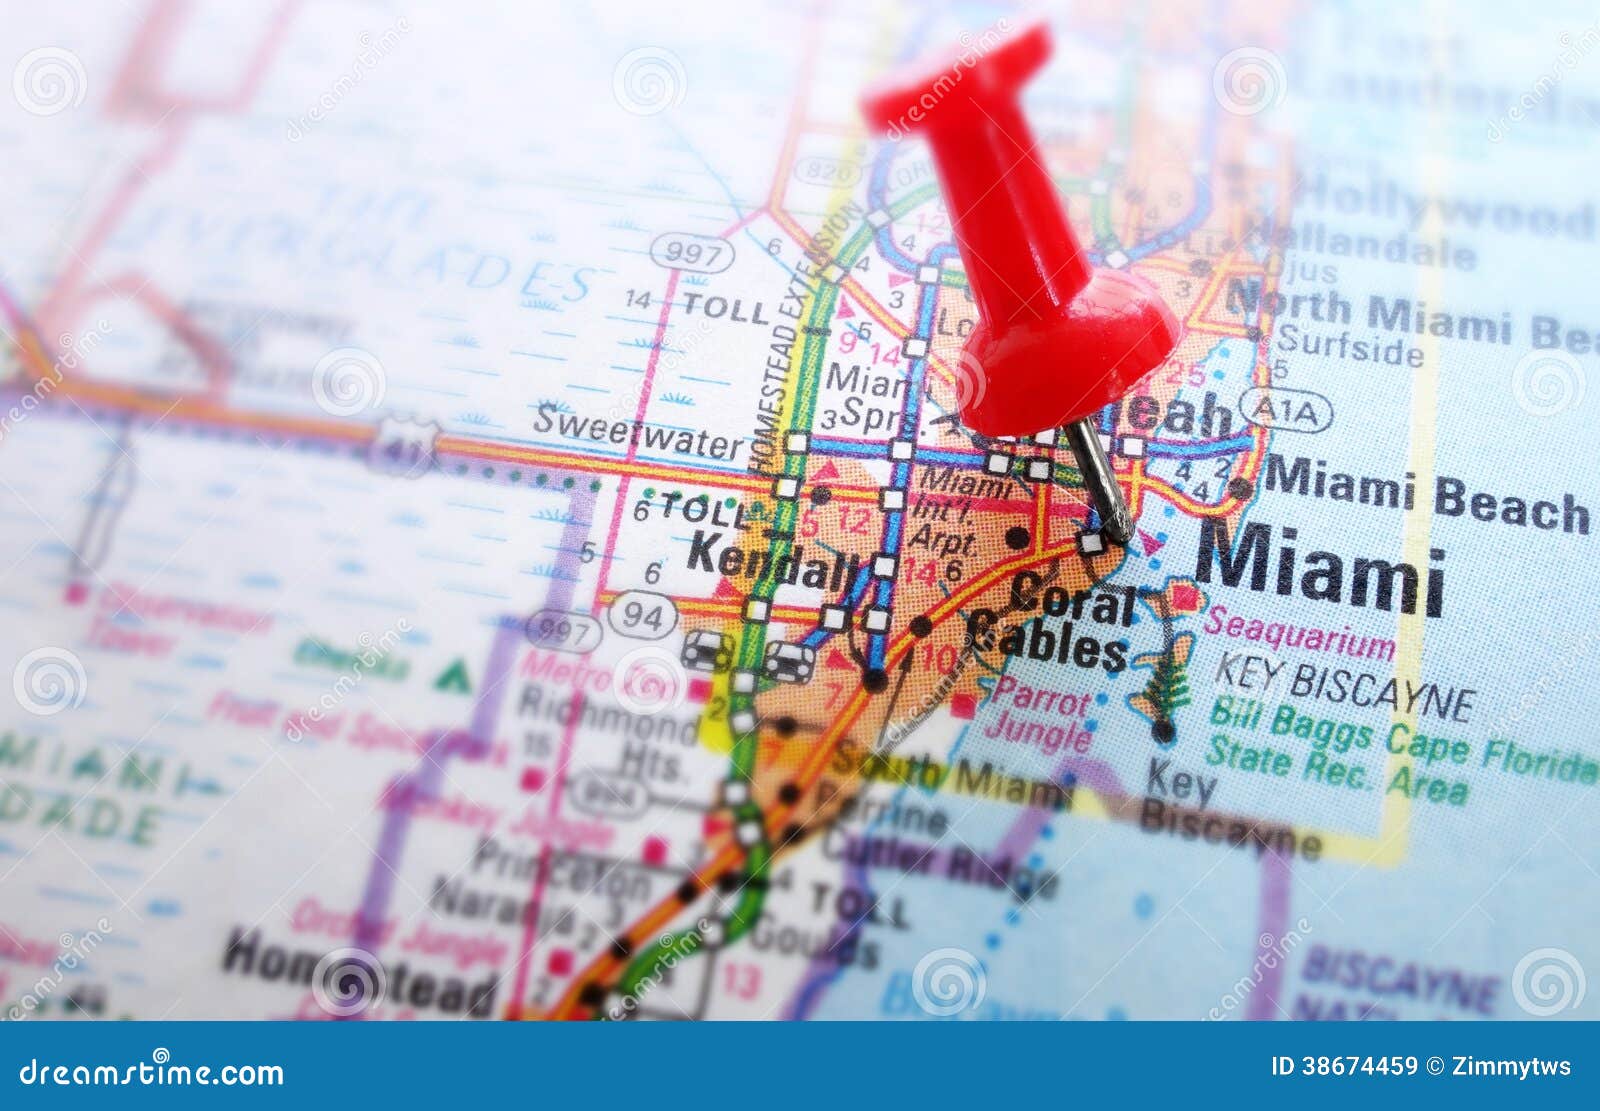 miami map stock image. image of location, find, urban